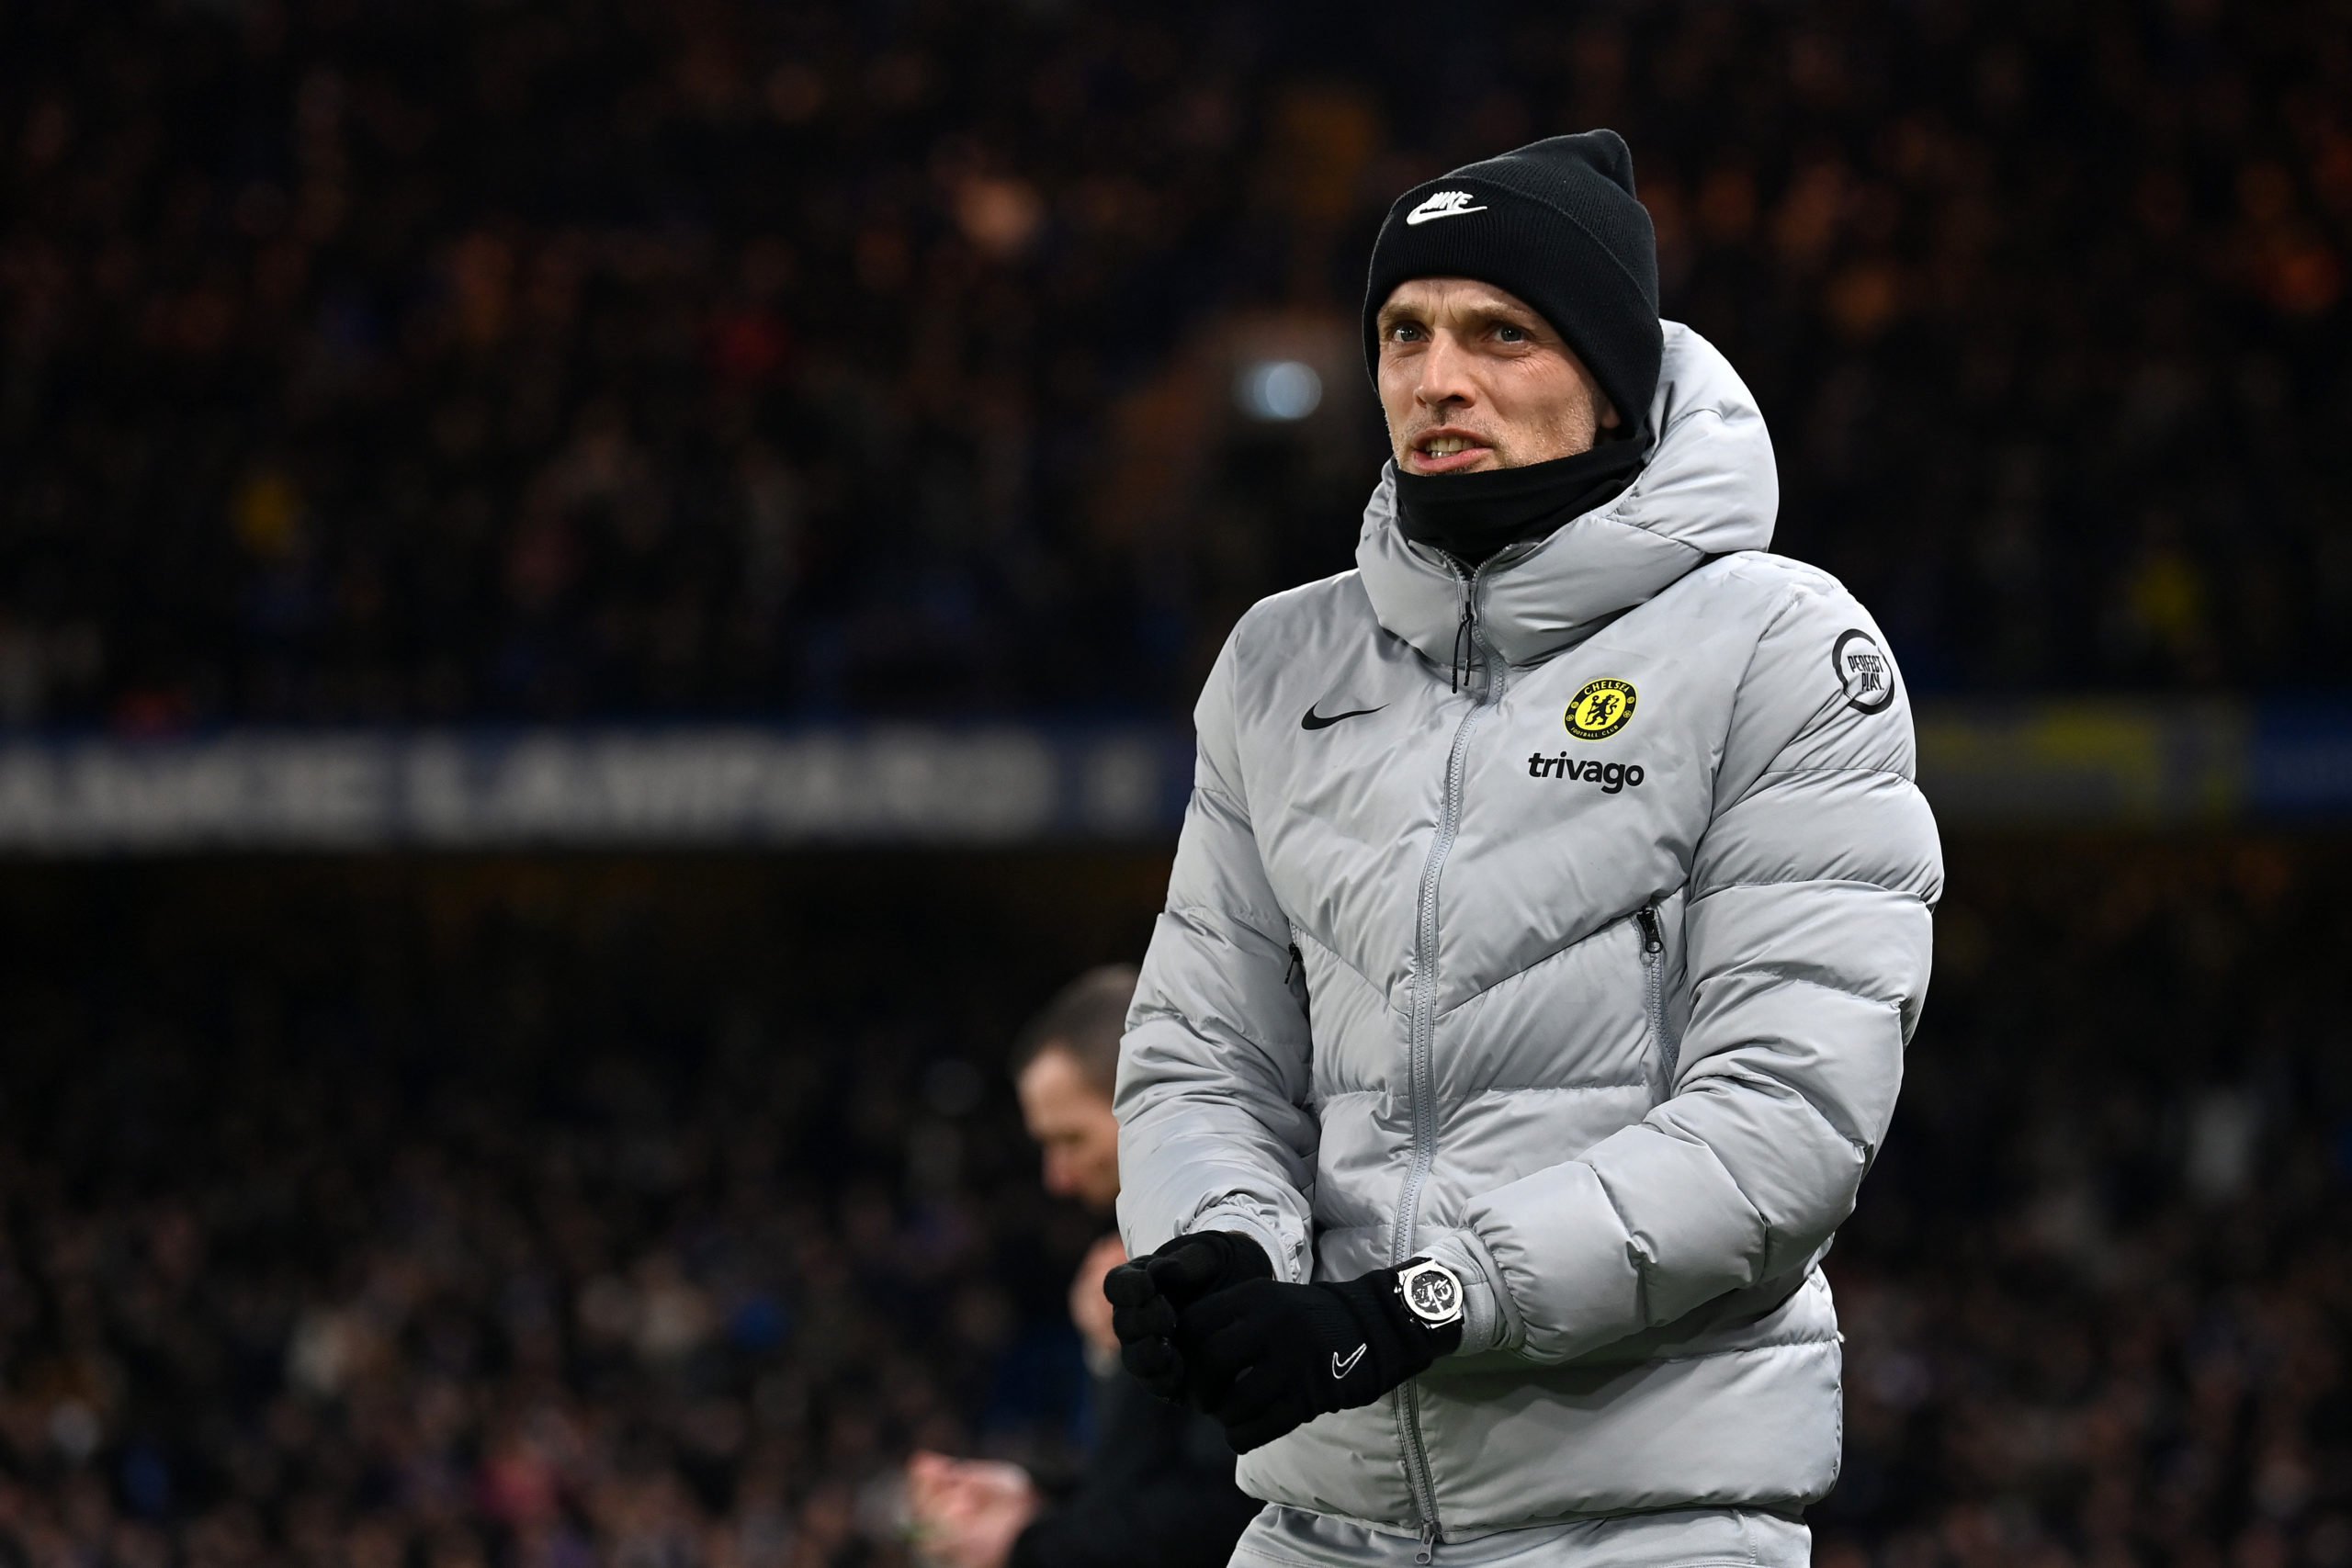 Tuchel hails 'reliable' 22-year-old Chelsea player after 'strong' performance against Spurs